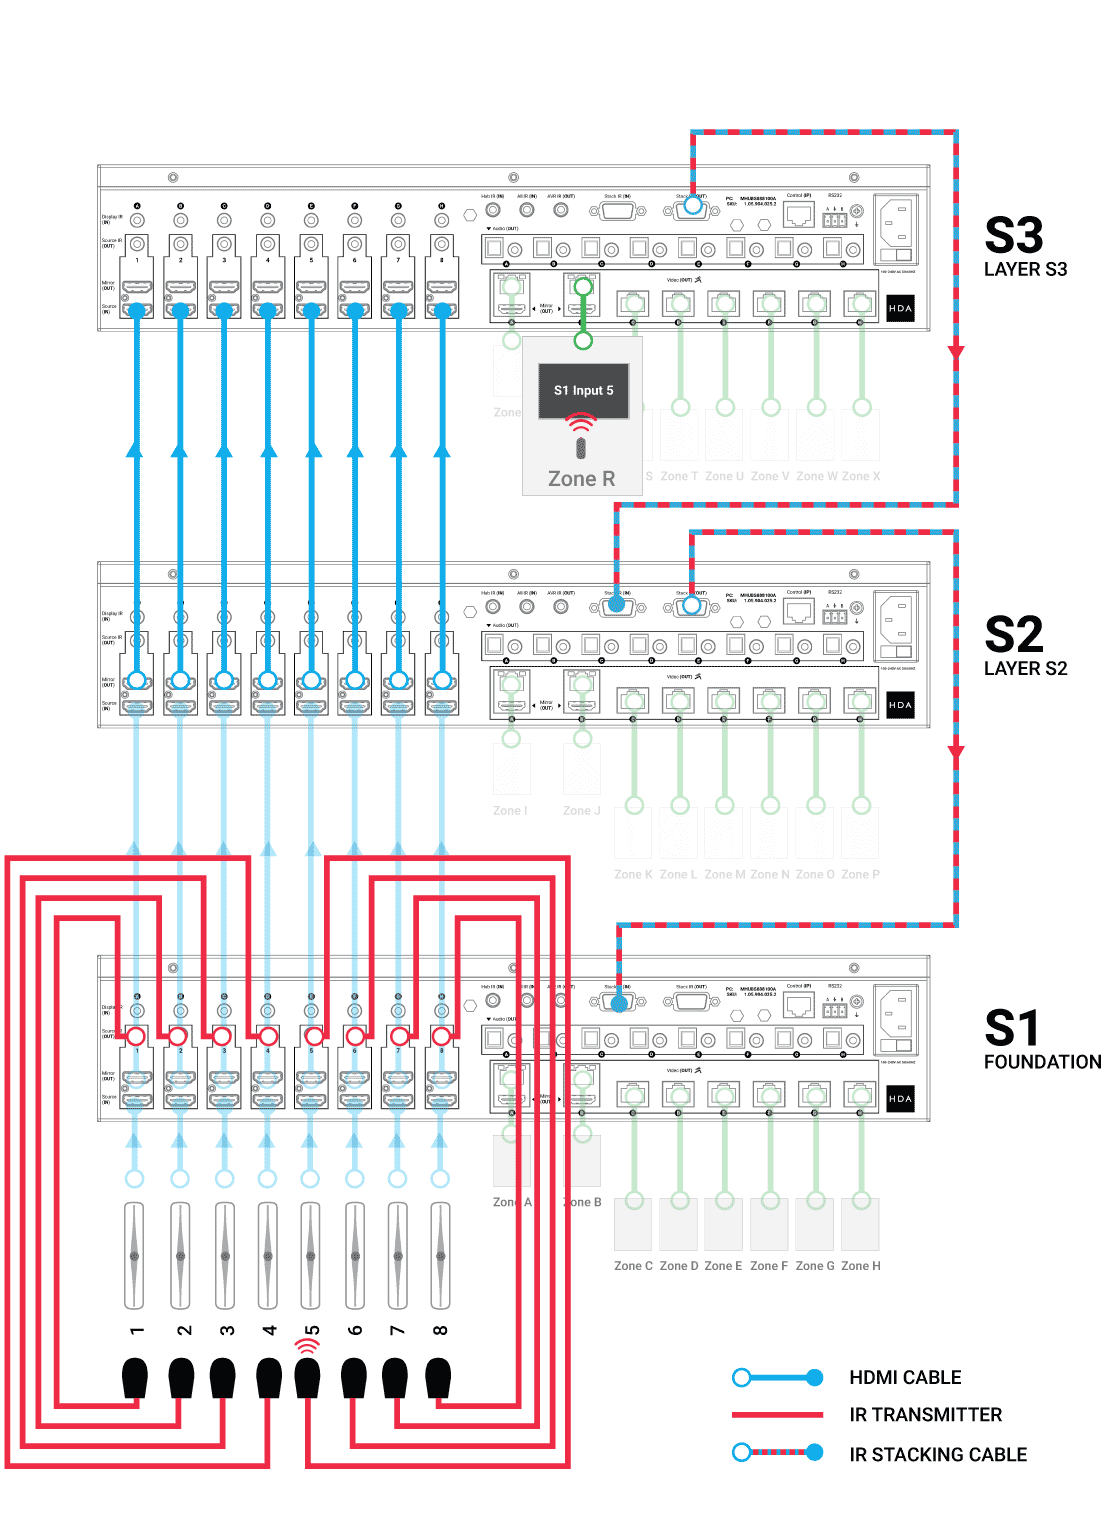 Wiring example for 8x24 system MHUB S